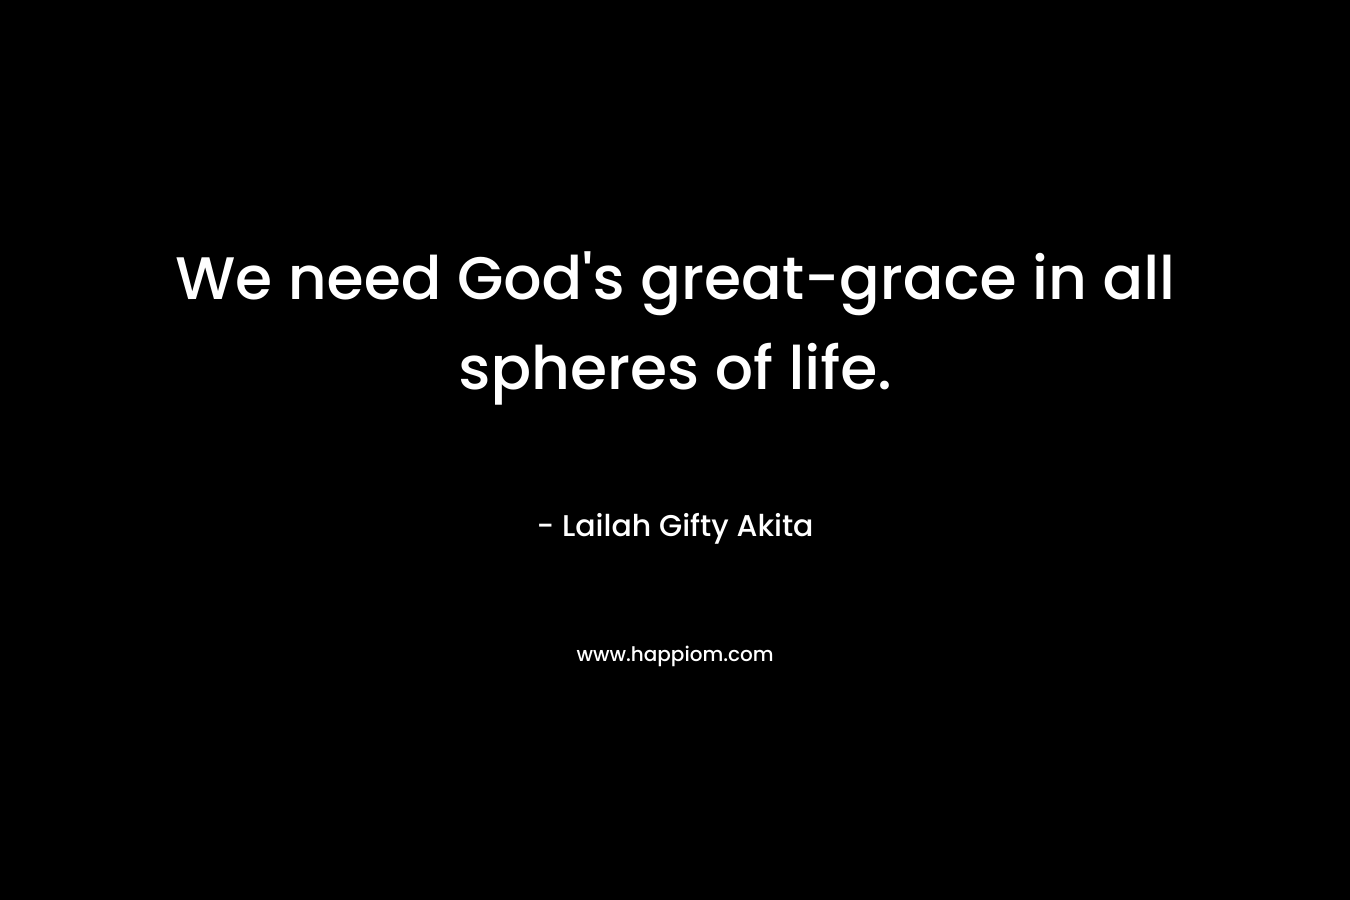 We need God’s great-grace in all spheres of life. – Lailah Gifty Akita